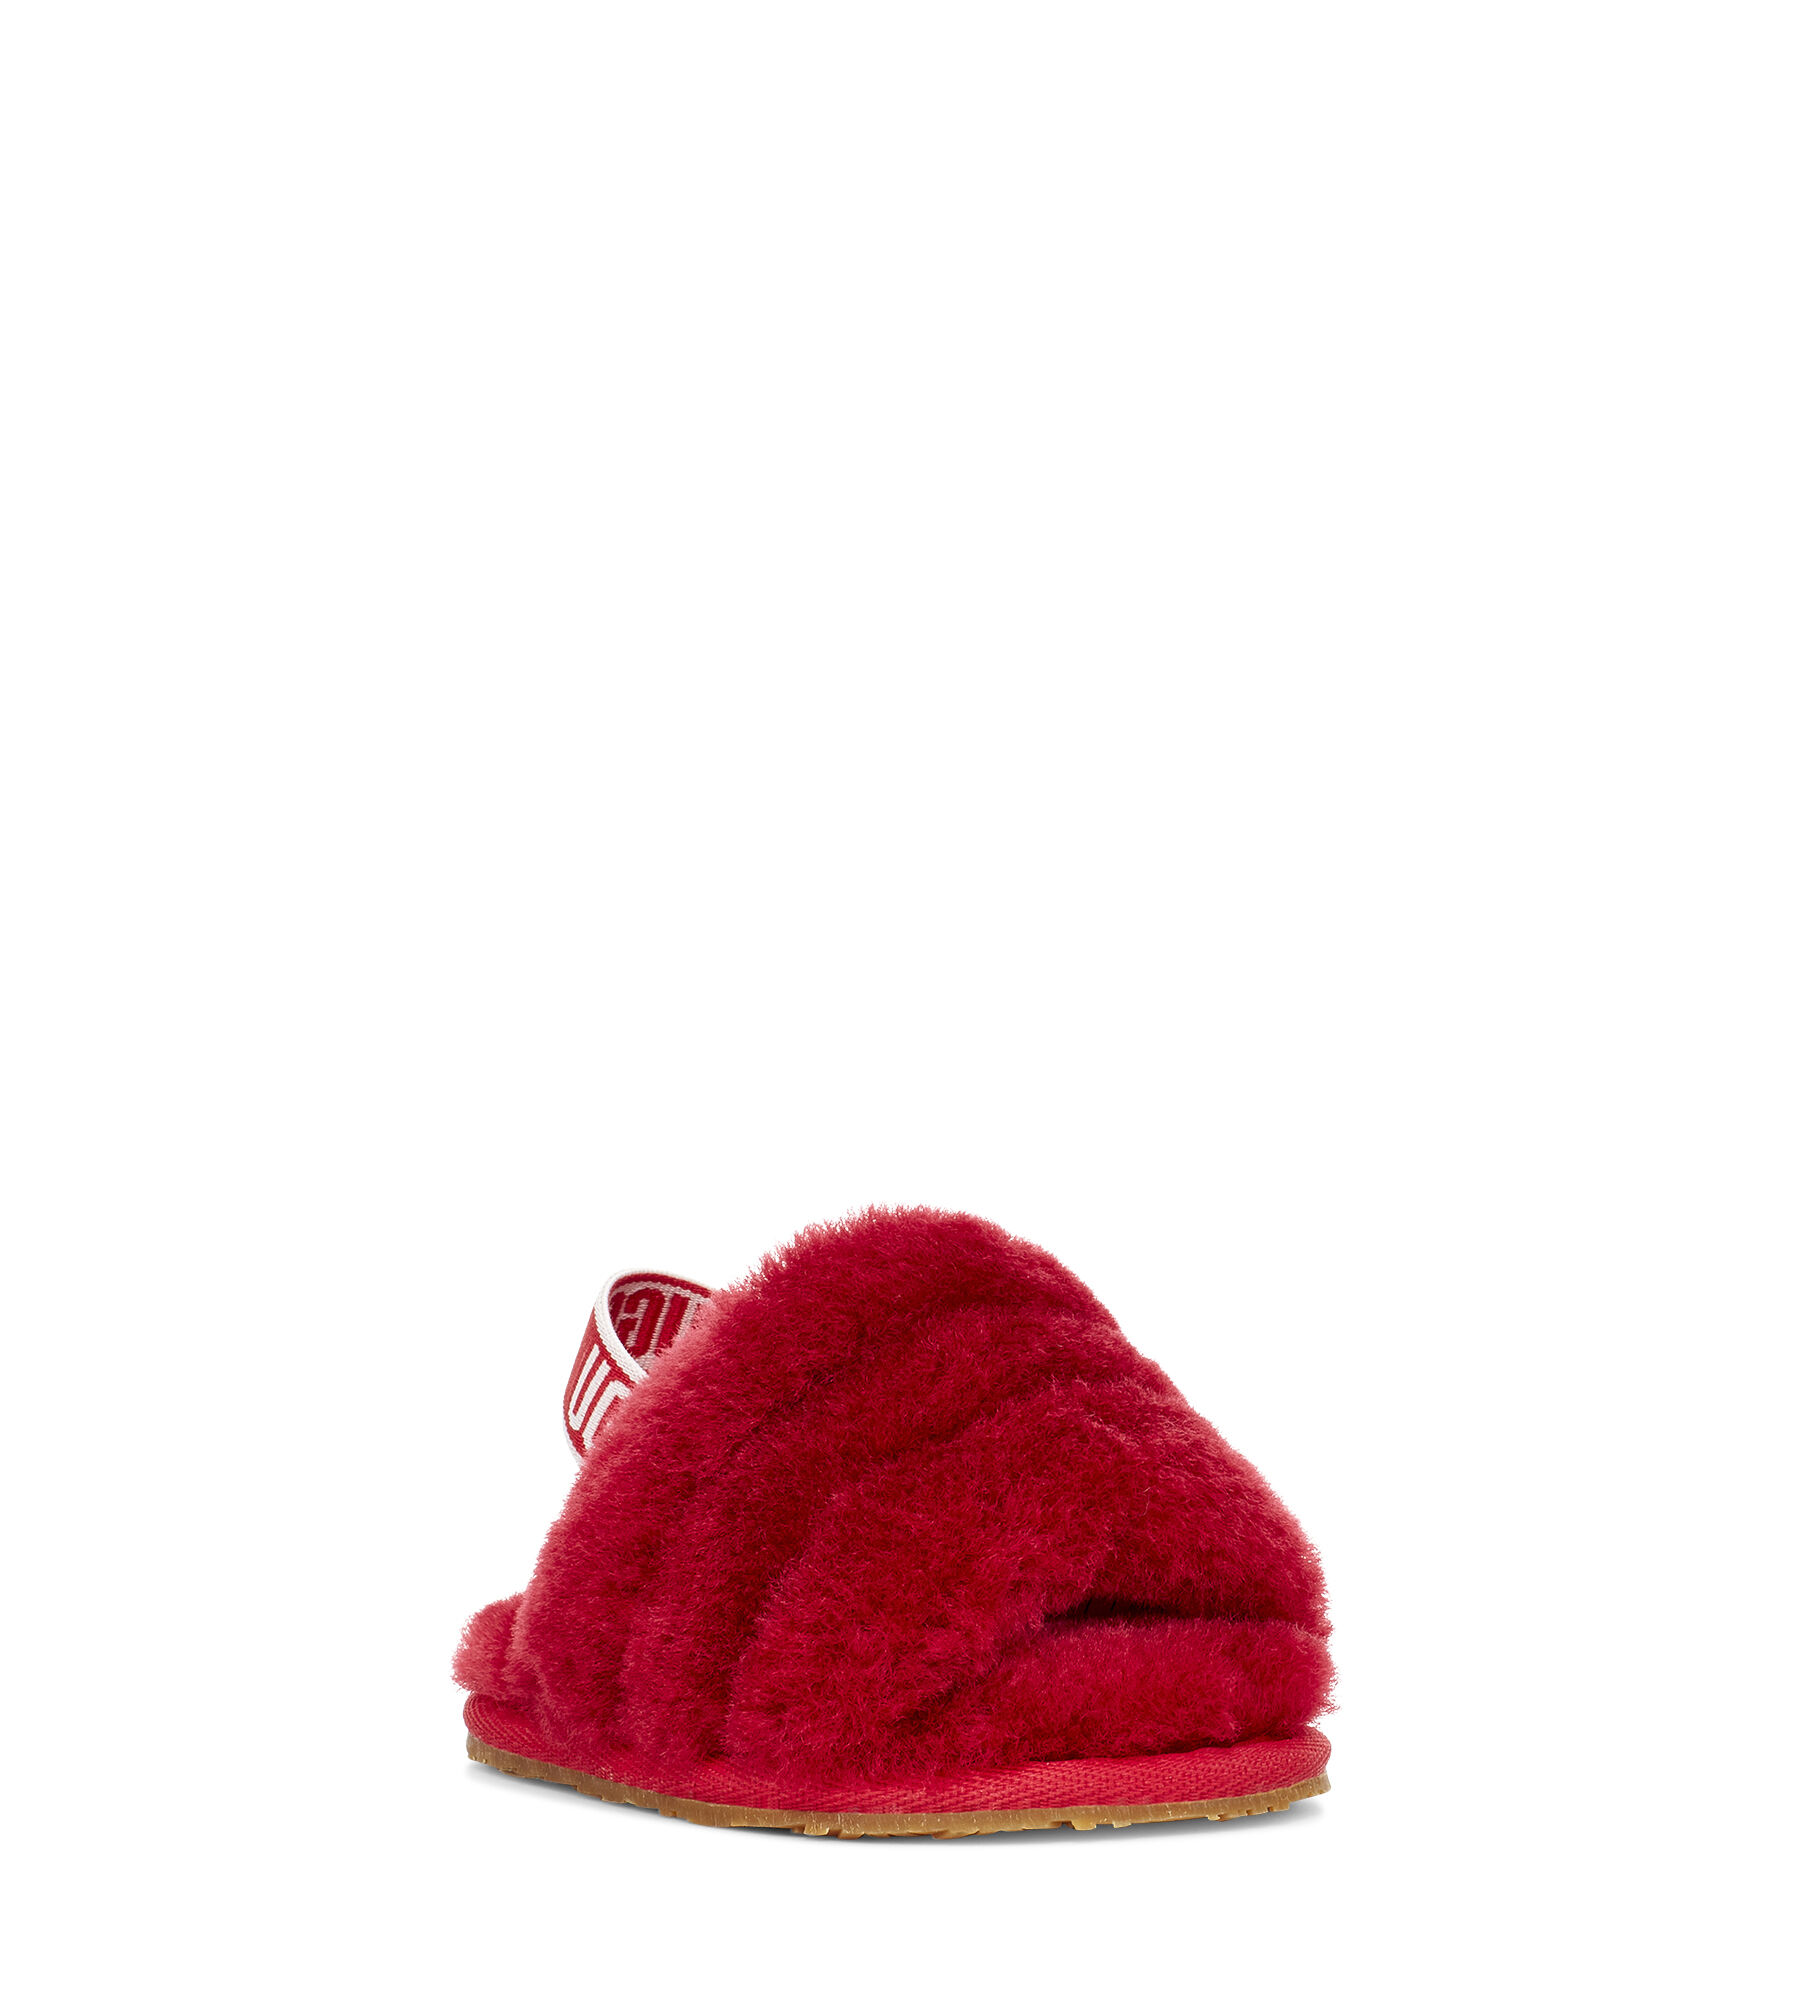 uggs slippers red